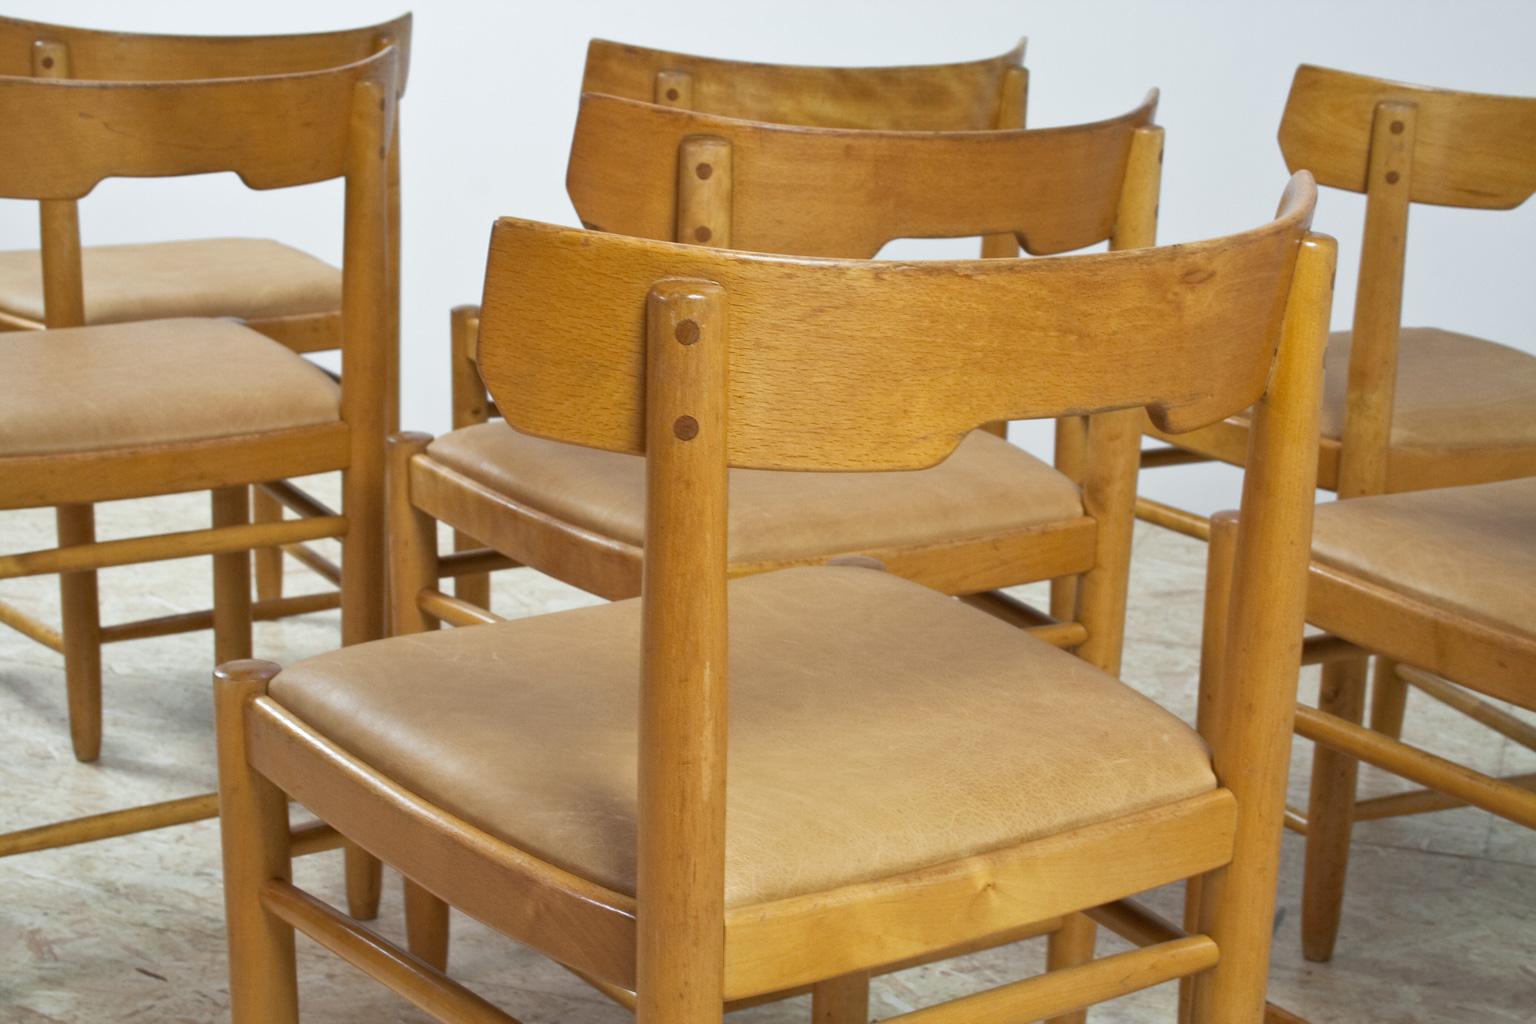 Mid-20th Century Scandinavian Modern Dining Room Chairs in Beech and Tan Leather, 1960s Set of 7  For Sale